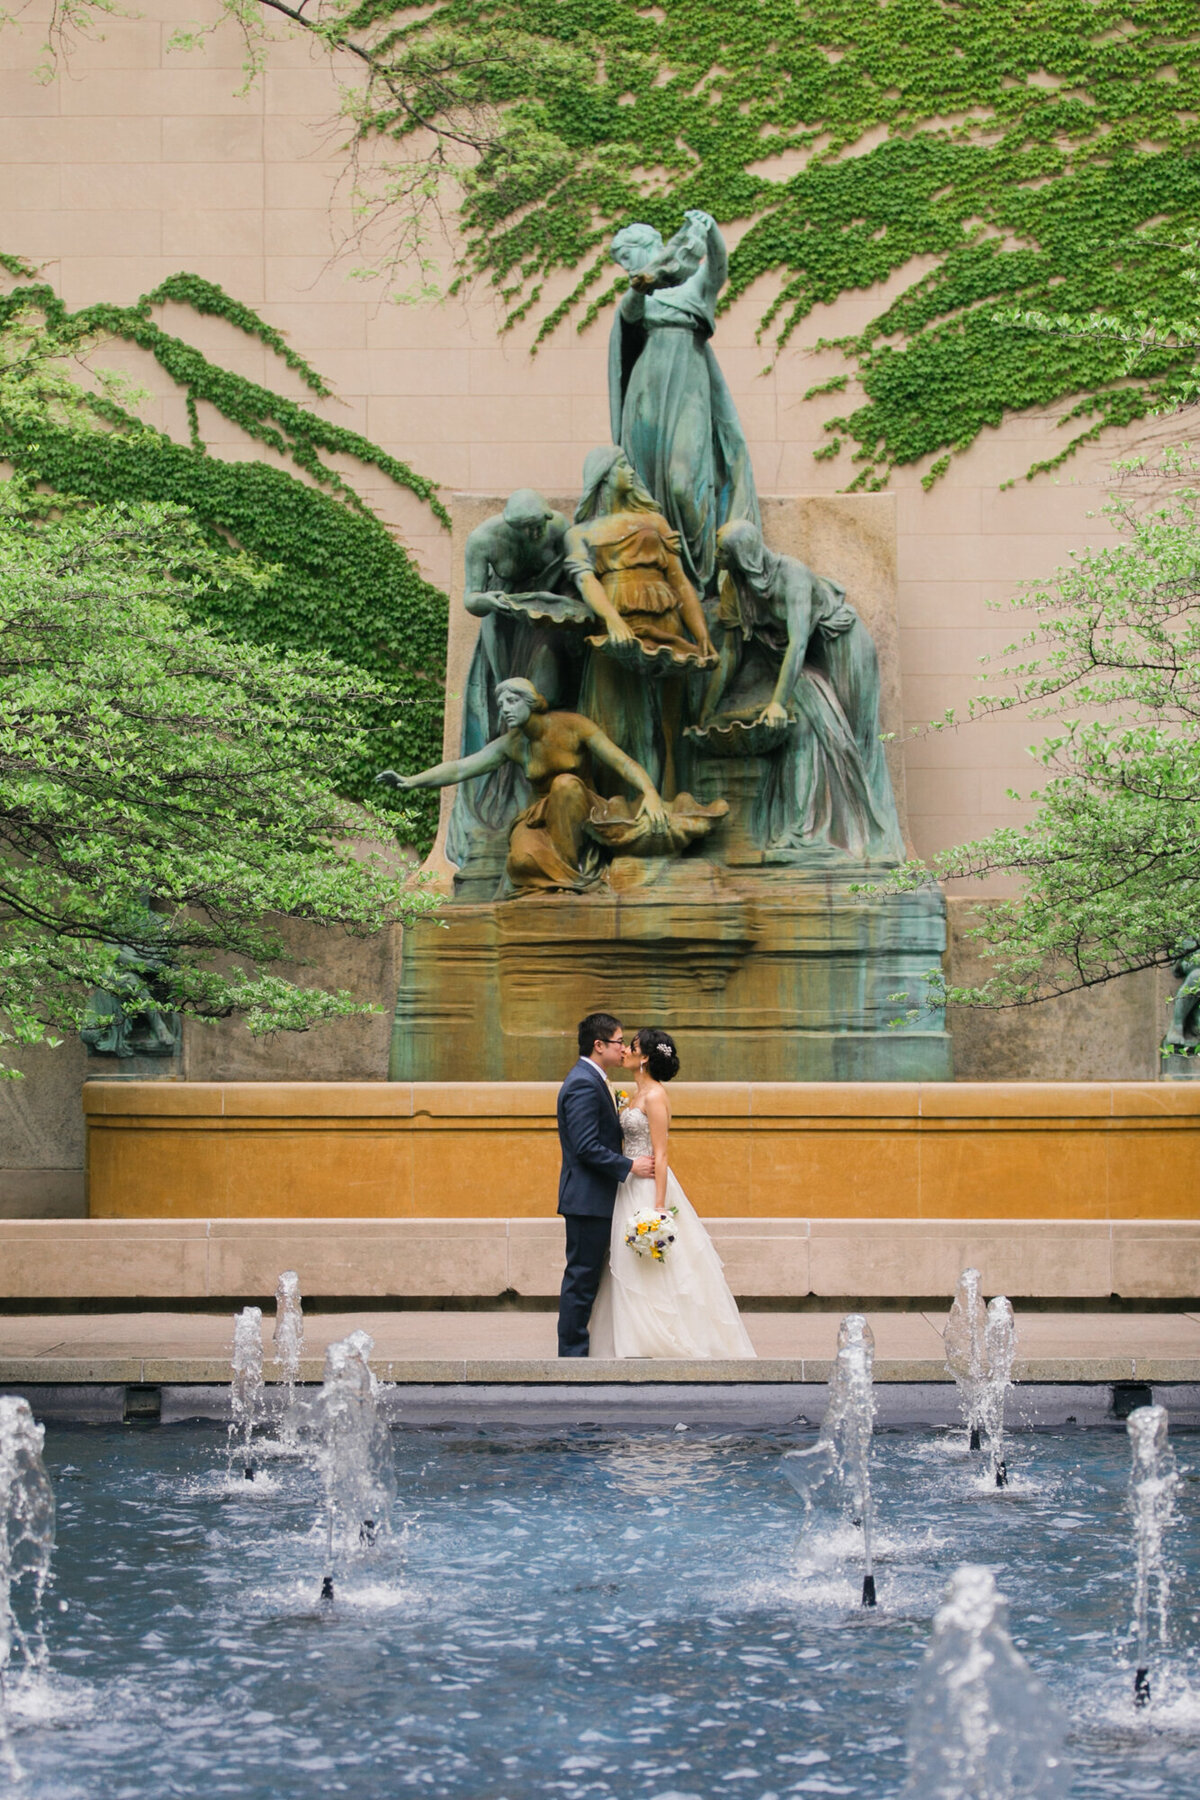 A beautiful wedding portrait taken at the South Garden of the Art Institute of Chicago